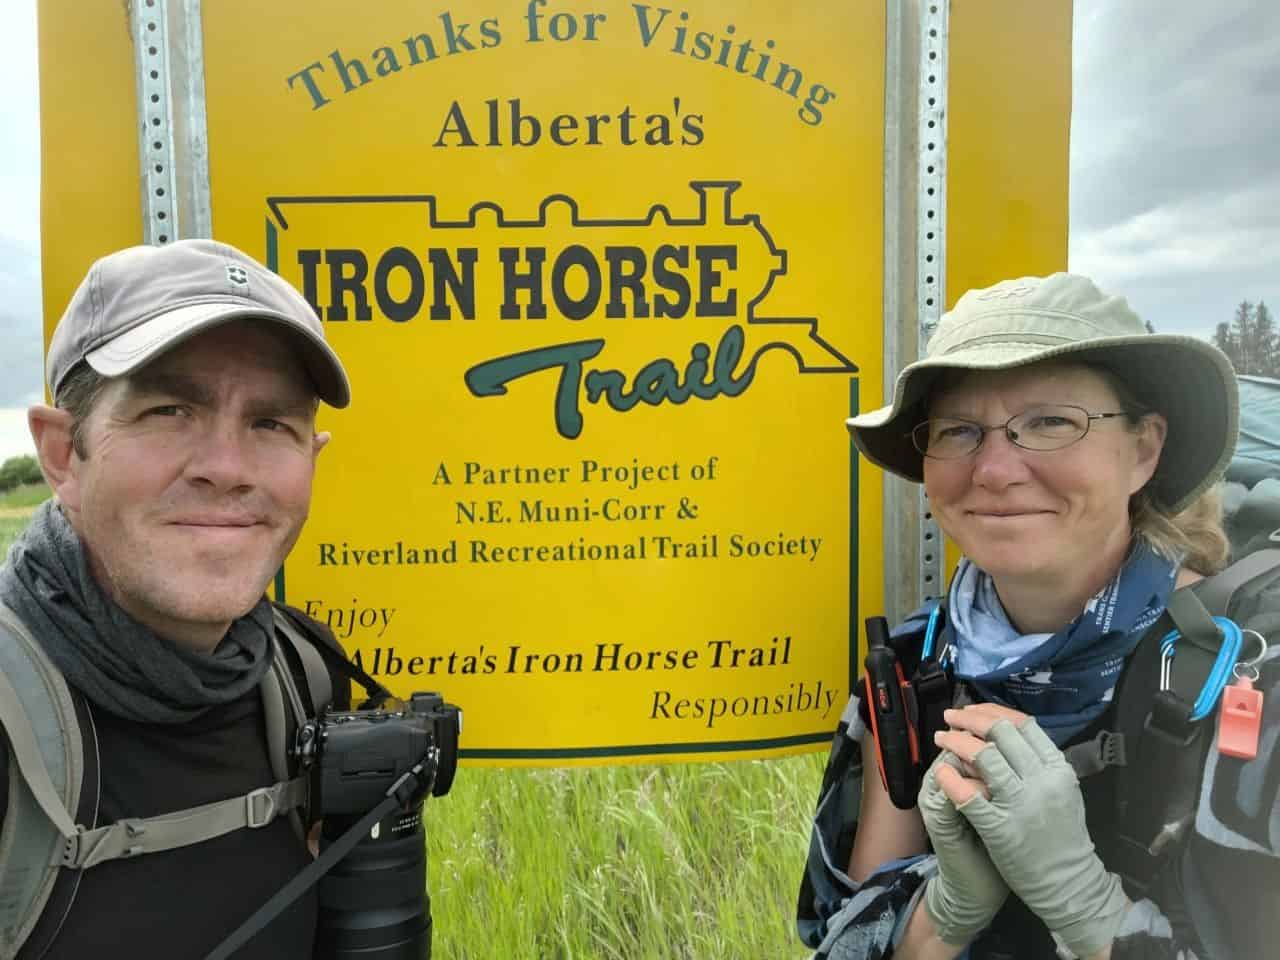 Whether you hike, cycle, horseback ride, or ATV the Iron Horse Trail of Alberta Canada offers fantastic opportunities for outdoor recreation.